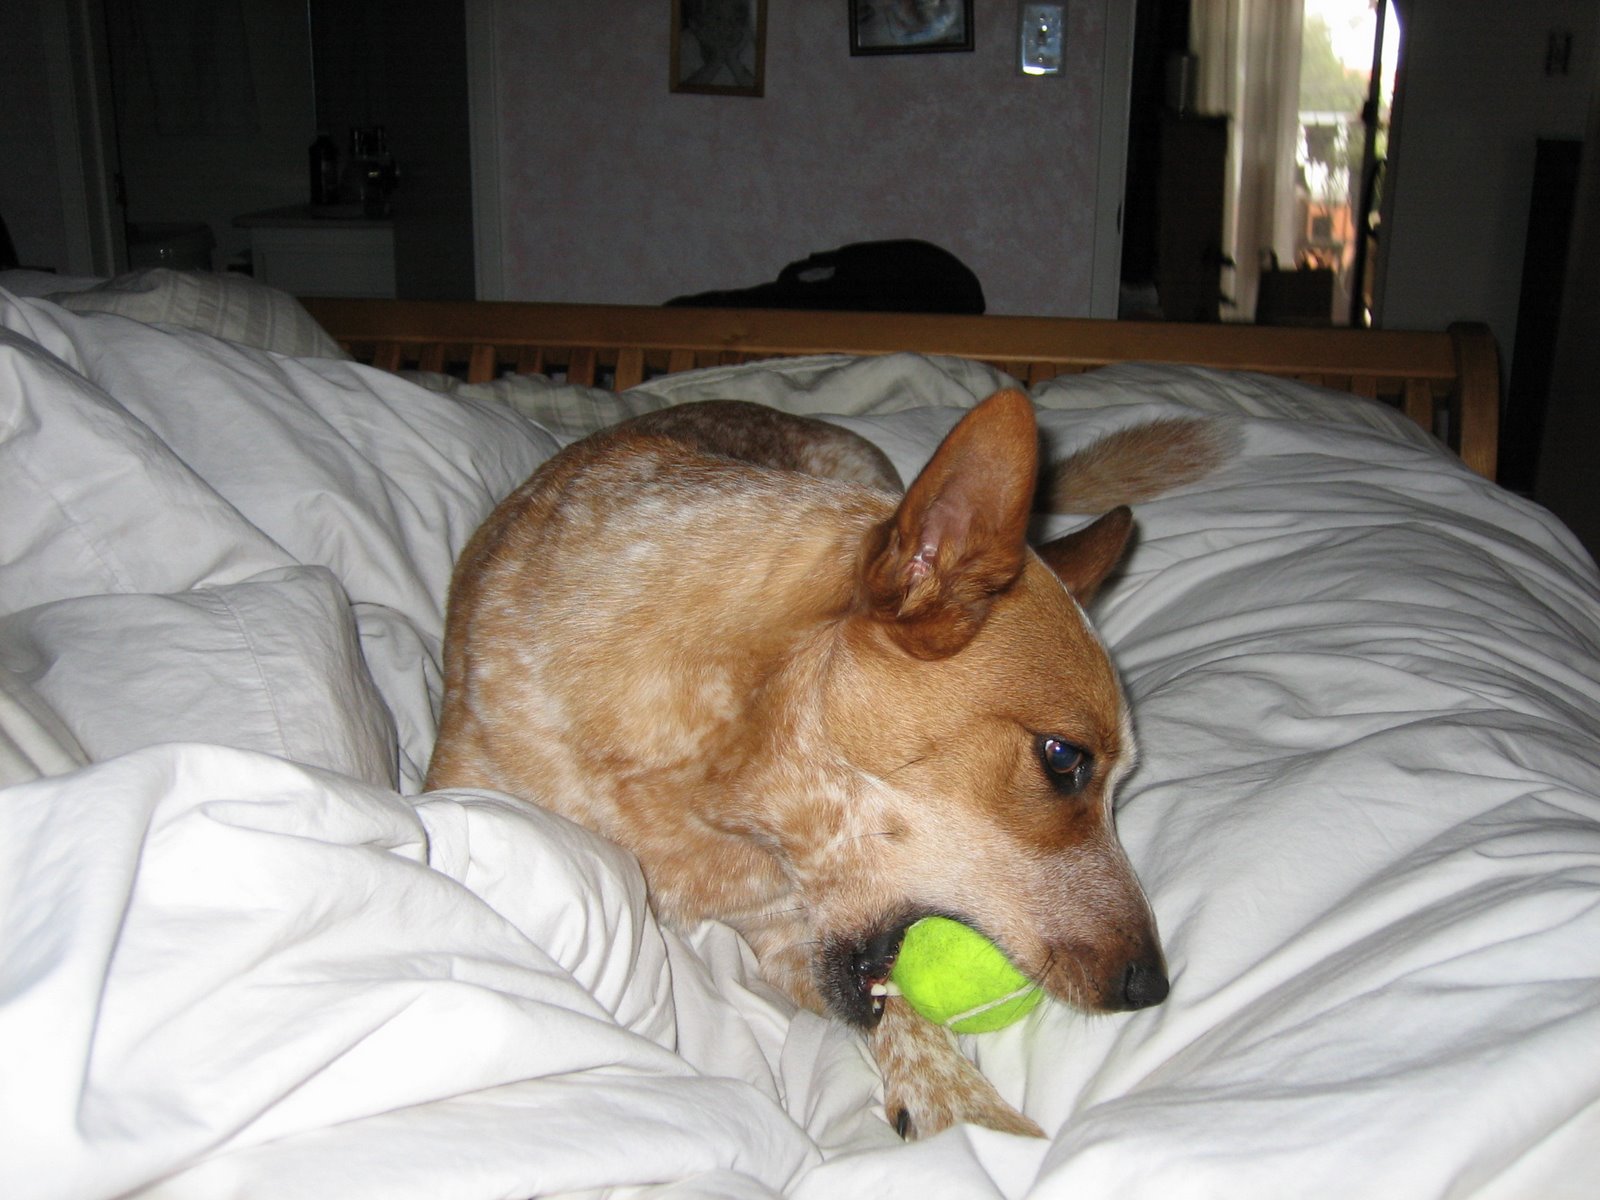 [velcro+chewing+her+ball+may+10+2006.jpg]